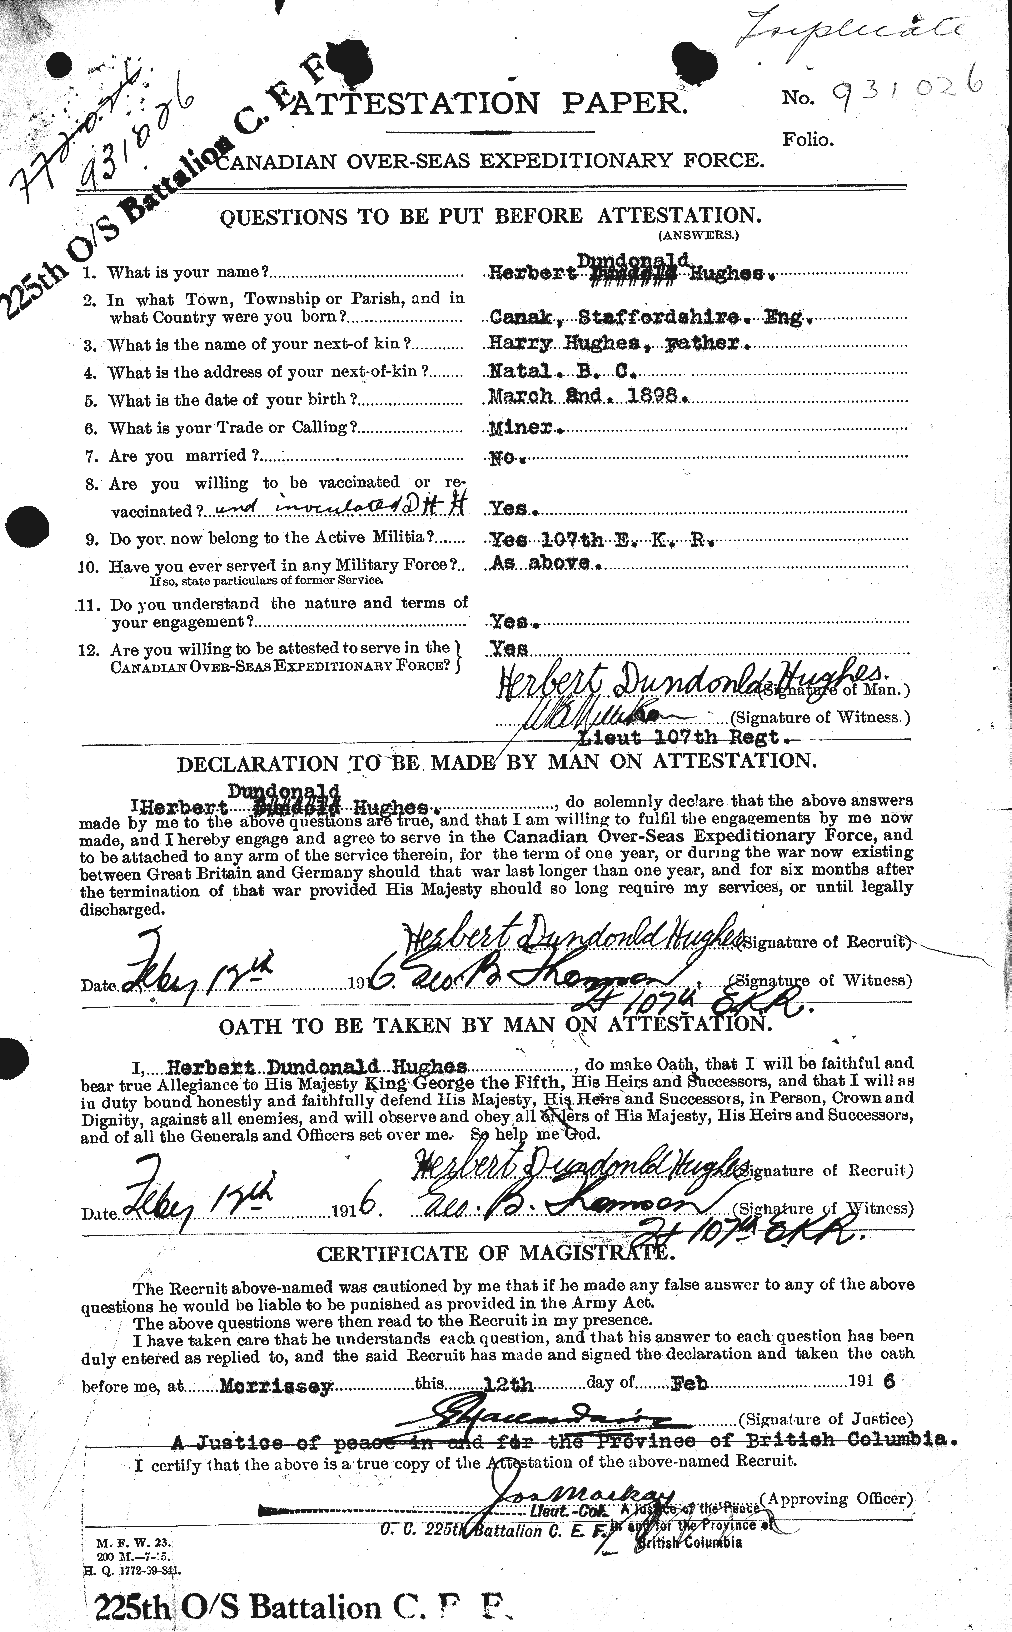 Personnel Records of the First World War - CEF 403897a